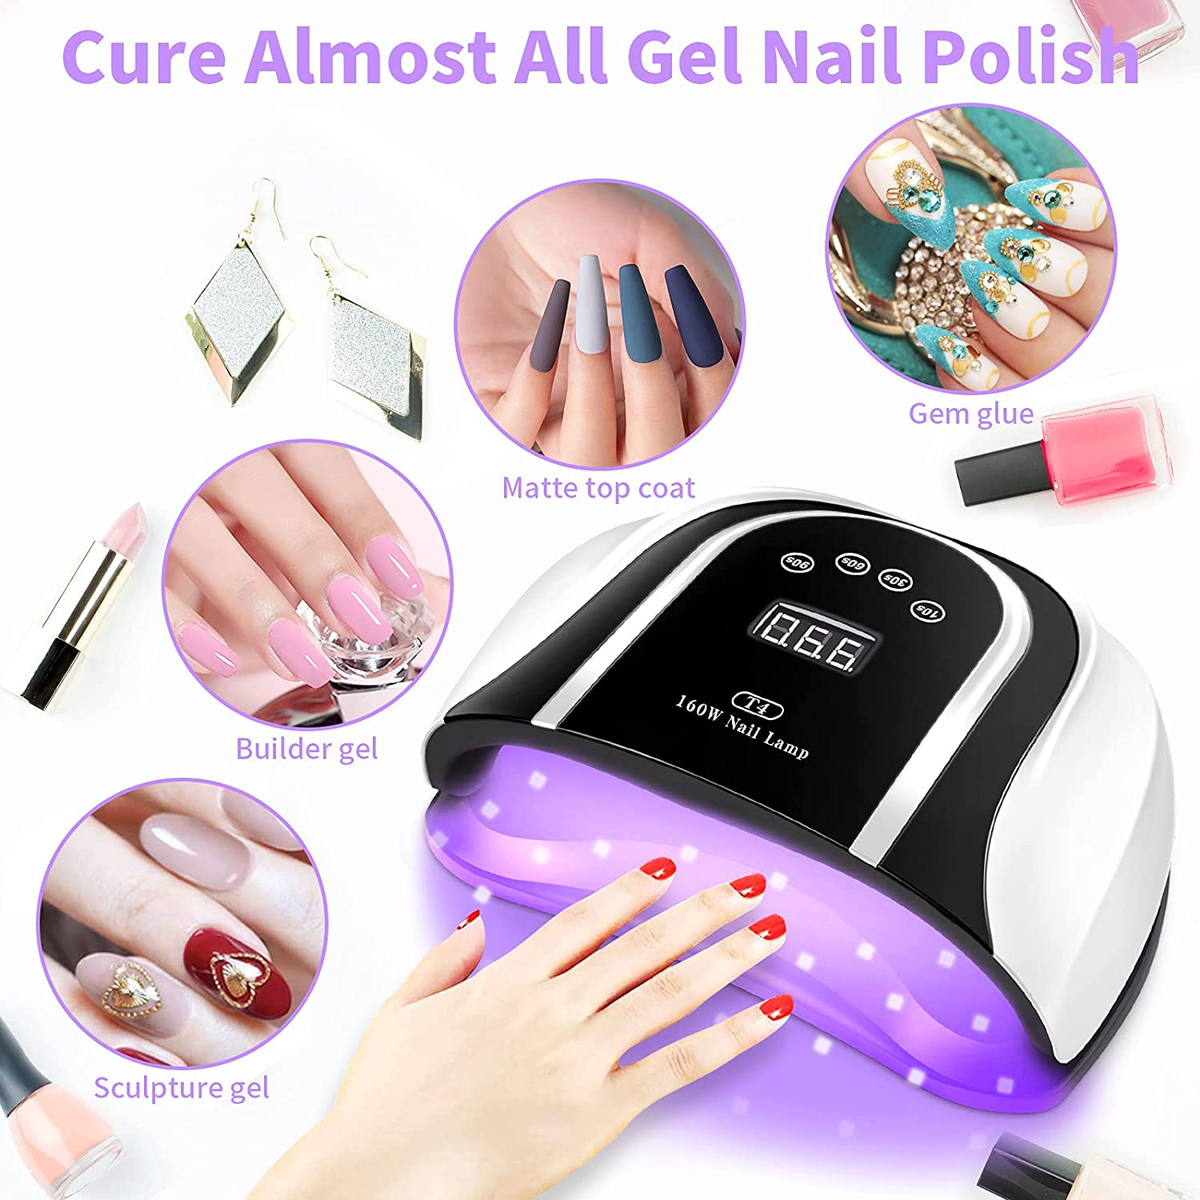  LED UV Lamp 160W Resin Curing Light Jewelry Casting Kit for Gel  Nail Polish, 4 Timer Setting, Auto Sensor : Arts, Crafts & Sewing